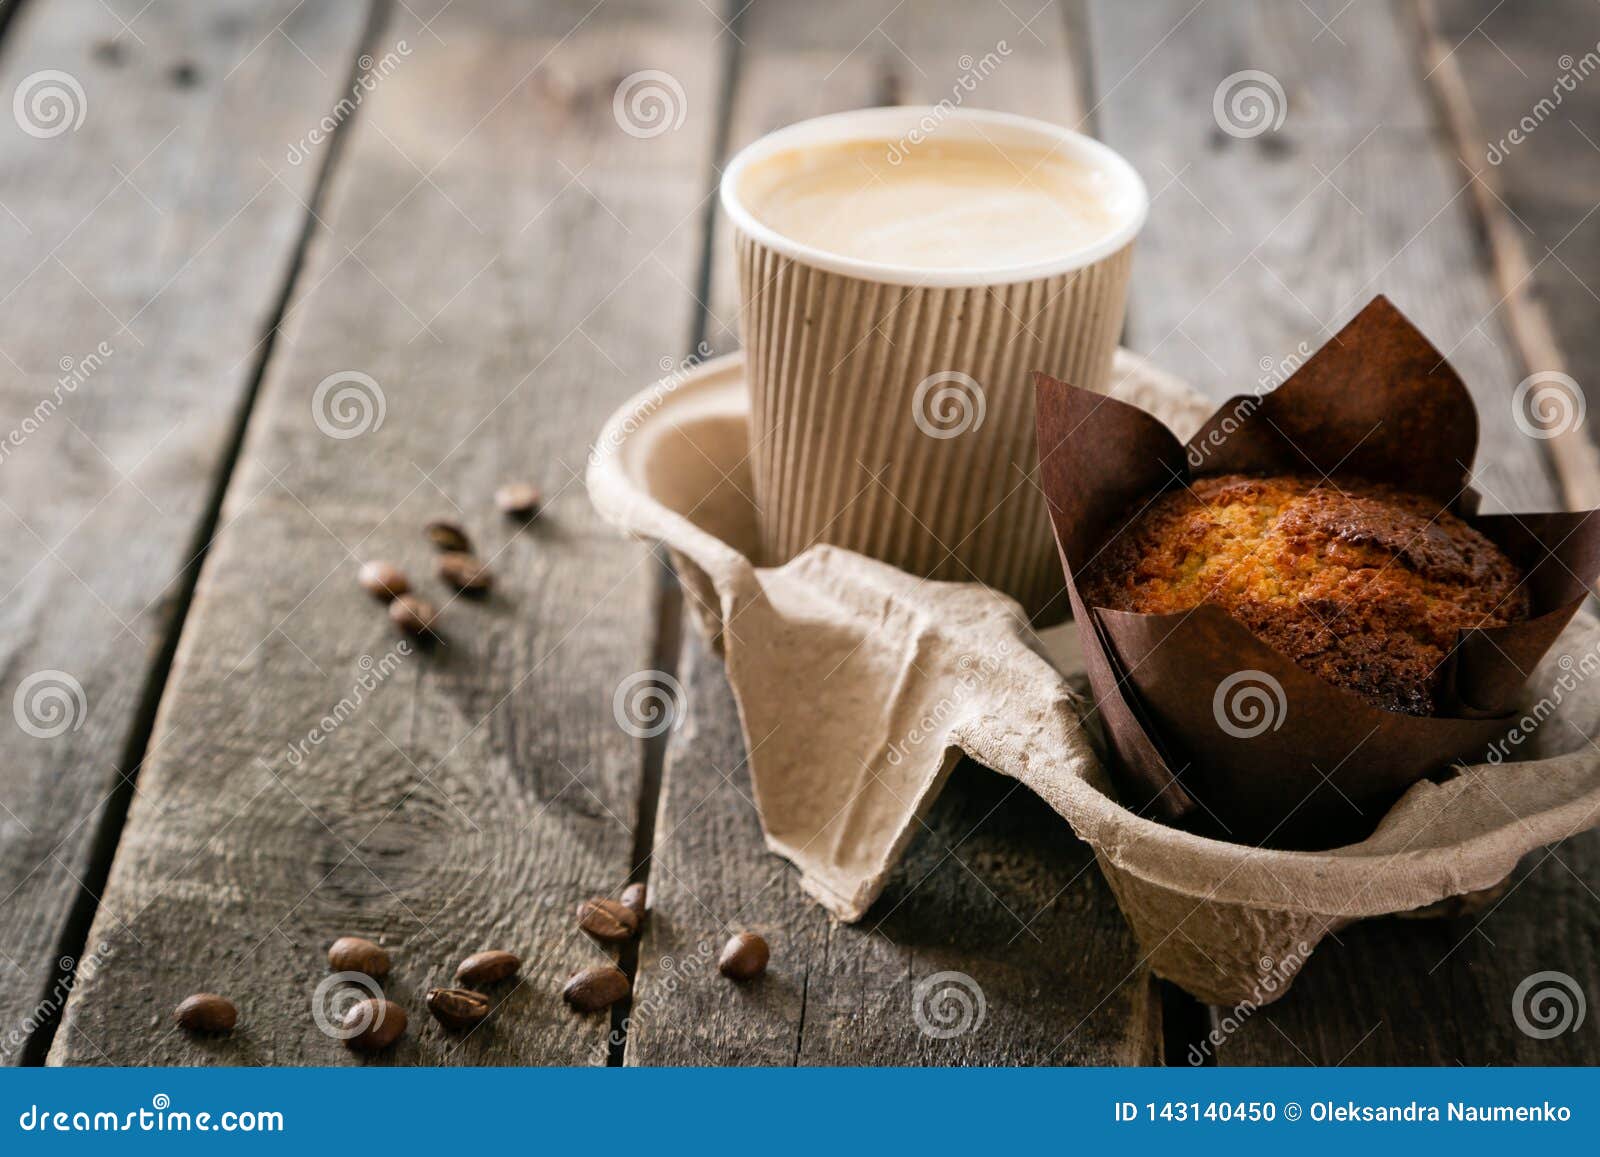 coffee to go with muffin on wood background